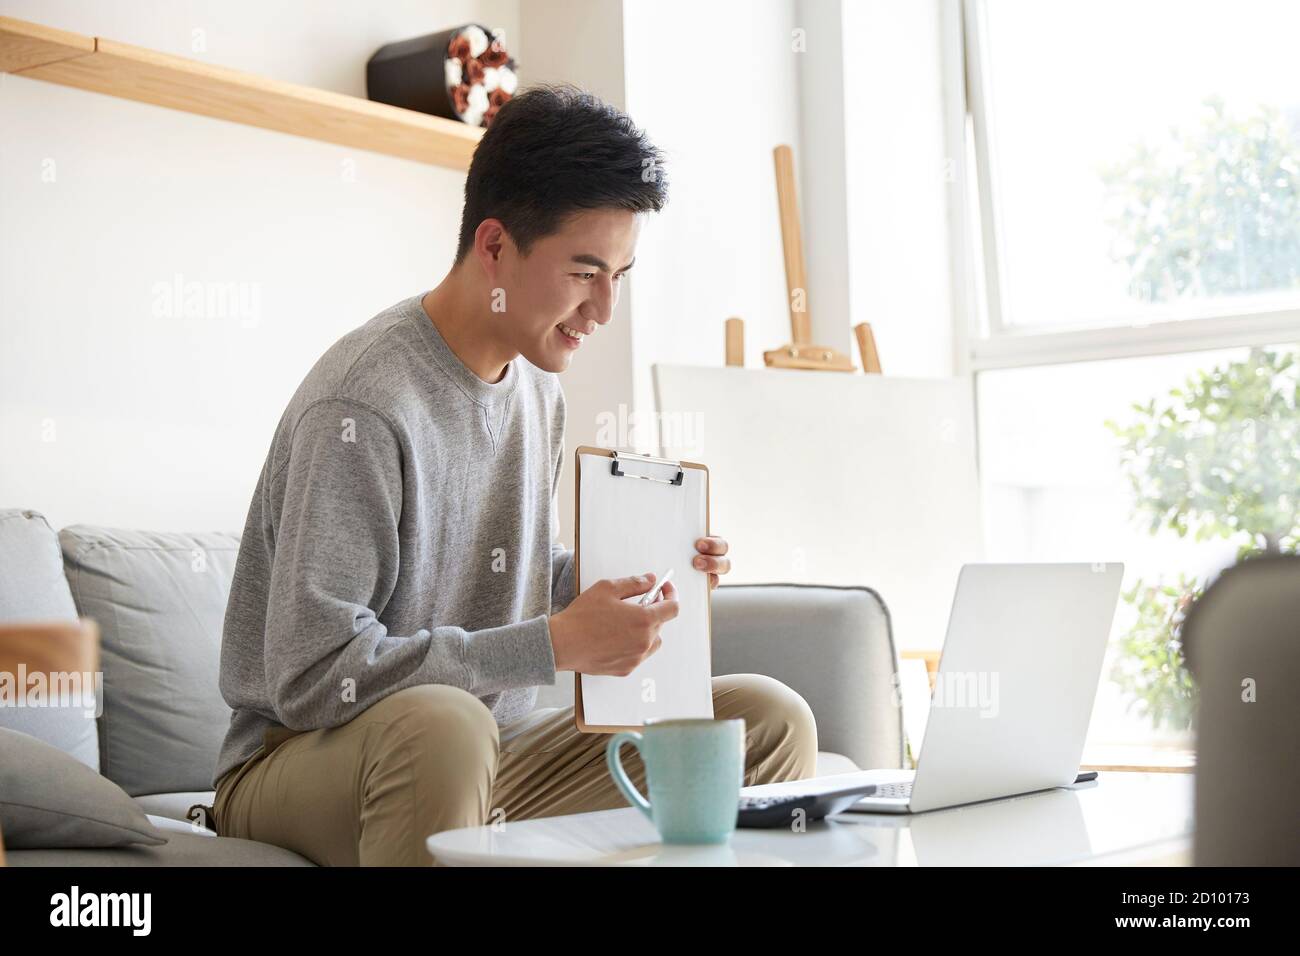 happy and smiling young asian corporate executive working from home meeting with colleagues or clients using video call Stock Photo